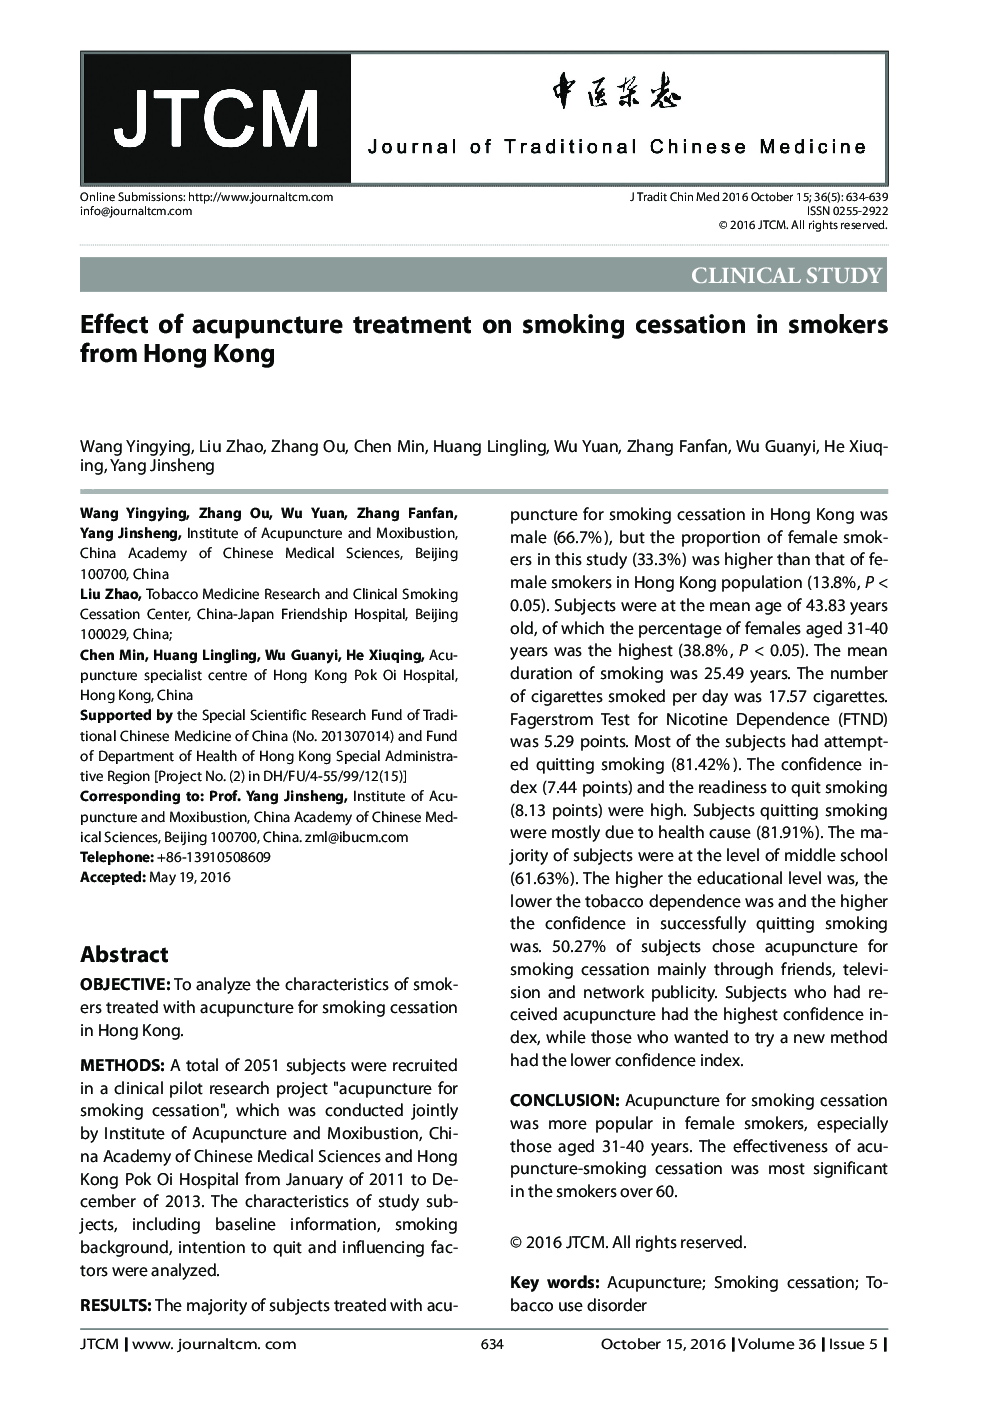 Effect of acupuncture treatment on smoking cessation in smokers from Hong Kong